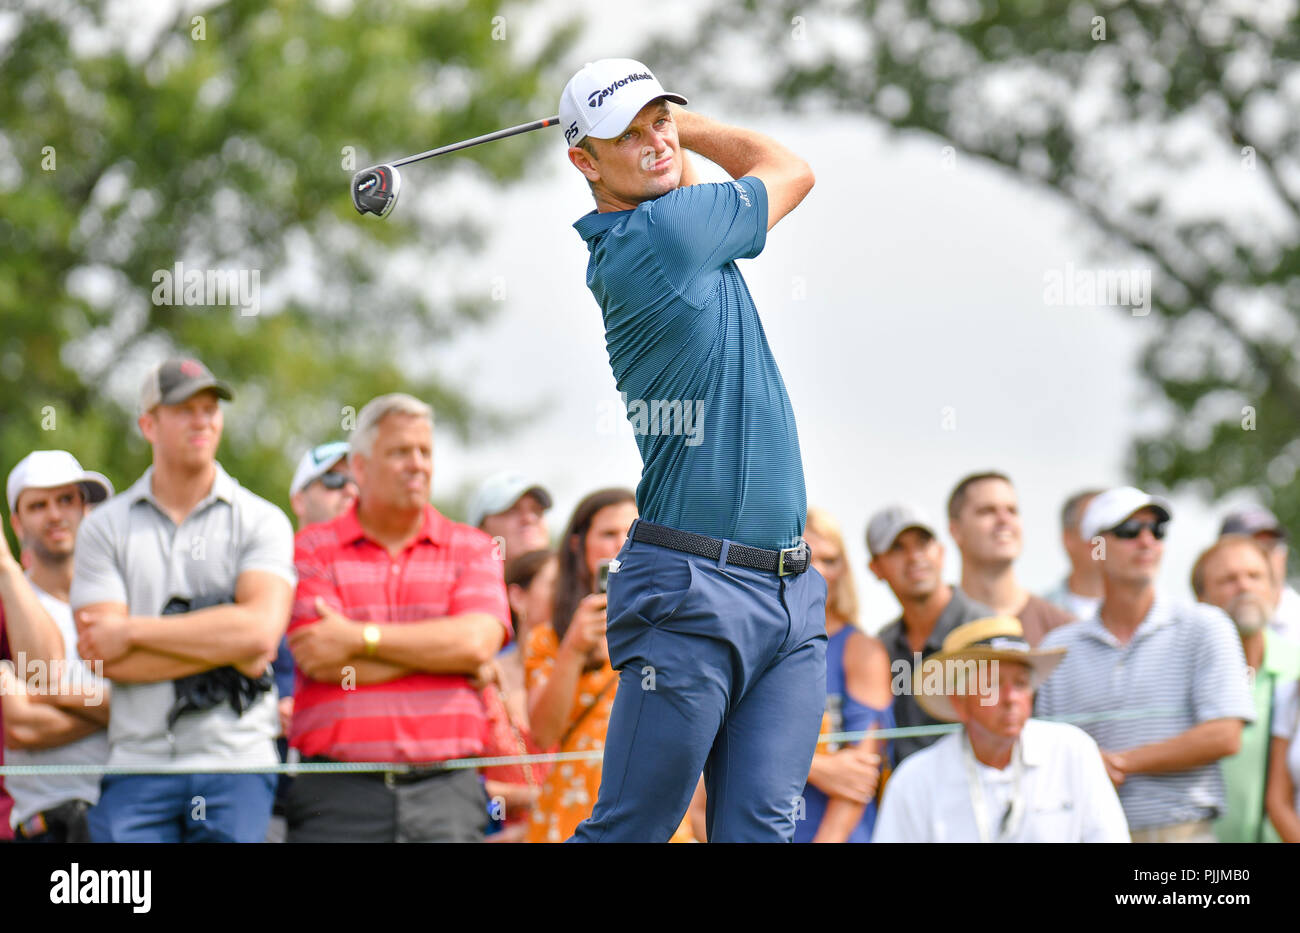 Newtown Square, Pennsylvania, USA: Friday September 7, 2018: Justion Rose watches his tee shot on the 12th hole during the second round of the BMW Championship at Aronimink Golf Course in Newtown Square, Pennsylvania. Gregory Vasil/CSM Credit: Cal Sport Media/Alamy Live News Stock Photo